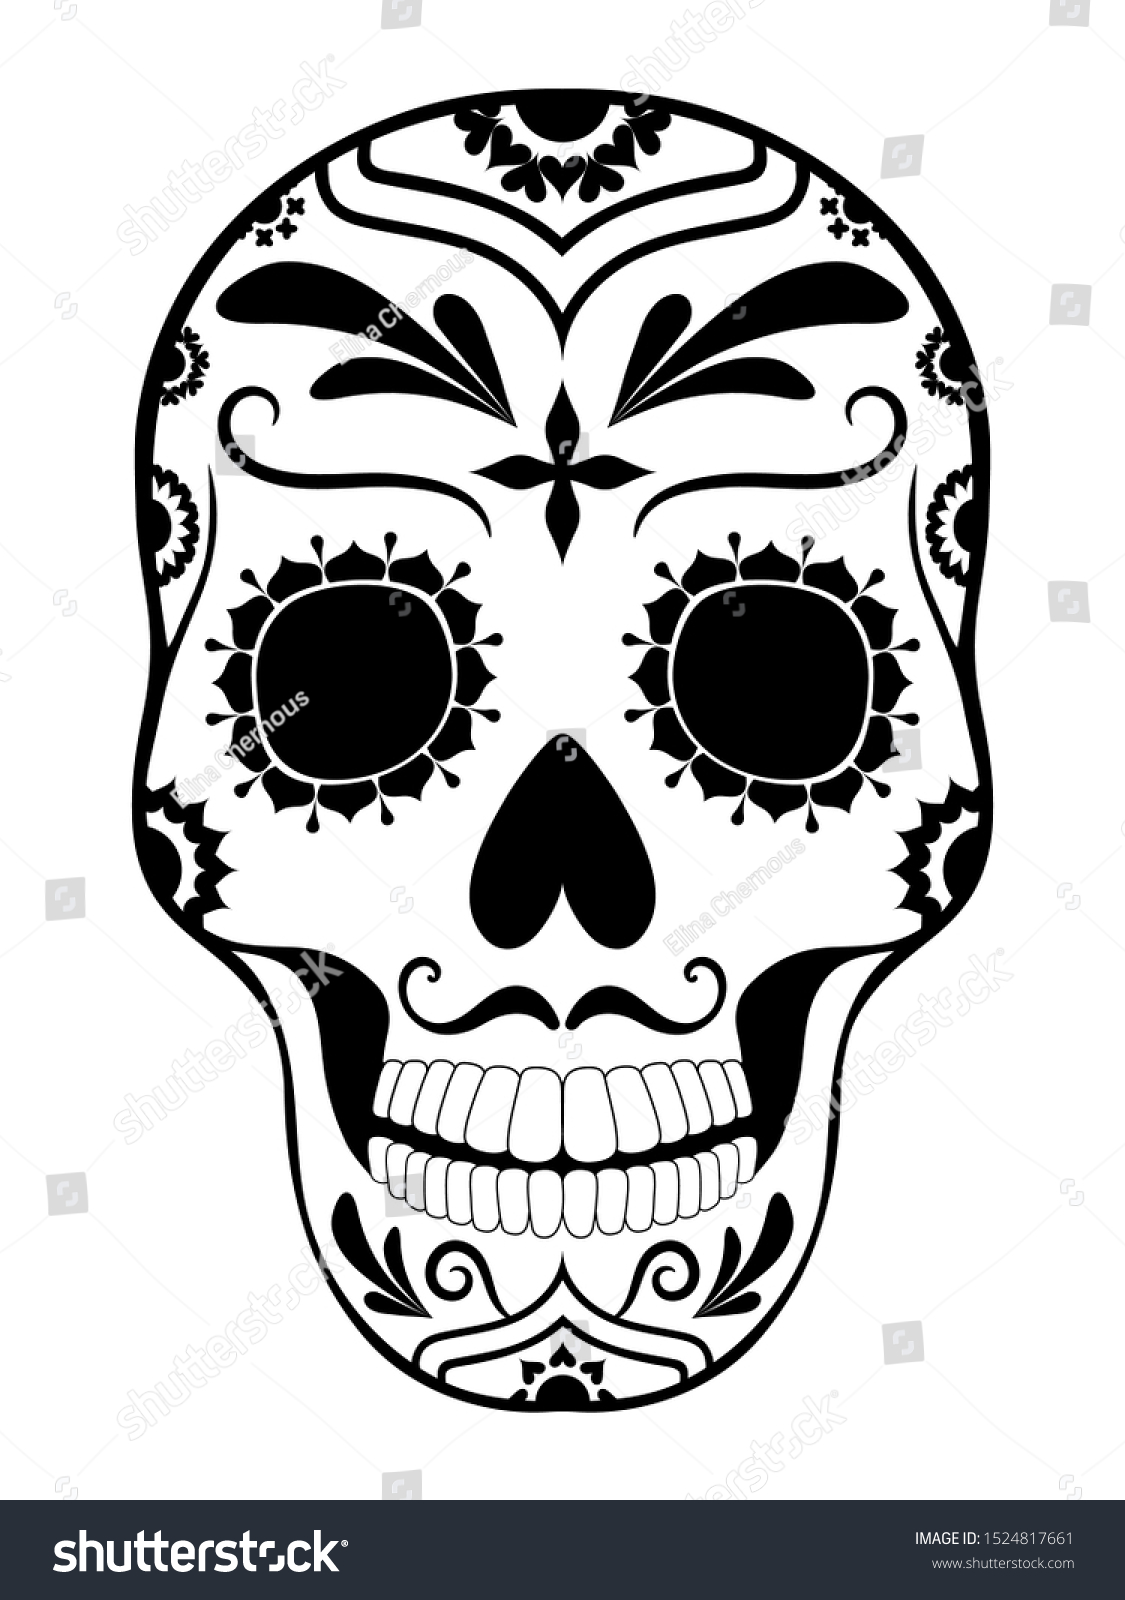 8 X 8 Sugar Skull Face/Profile STENCIL Day of the Dead/Mexican Halloween/Flowers 